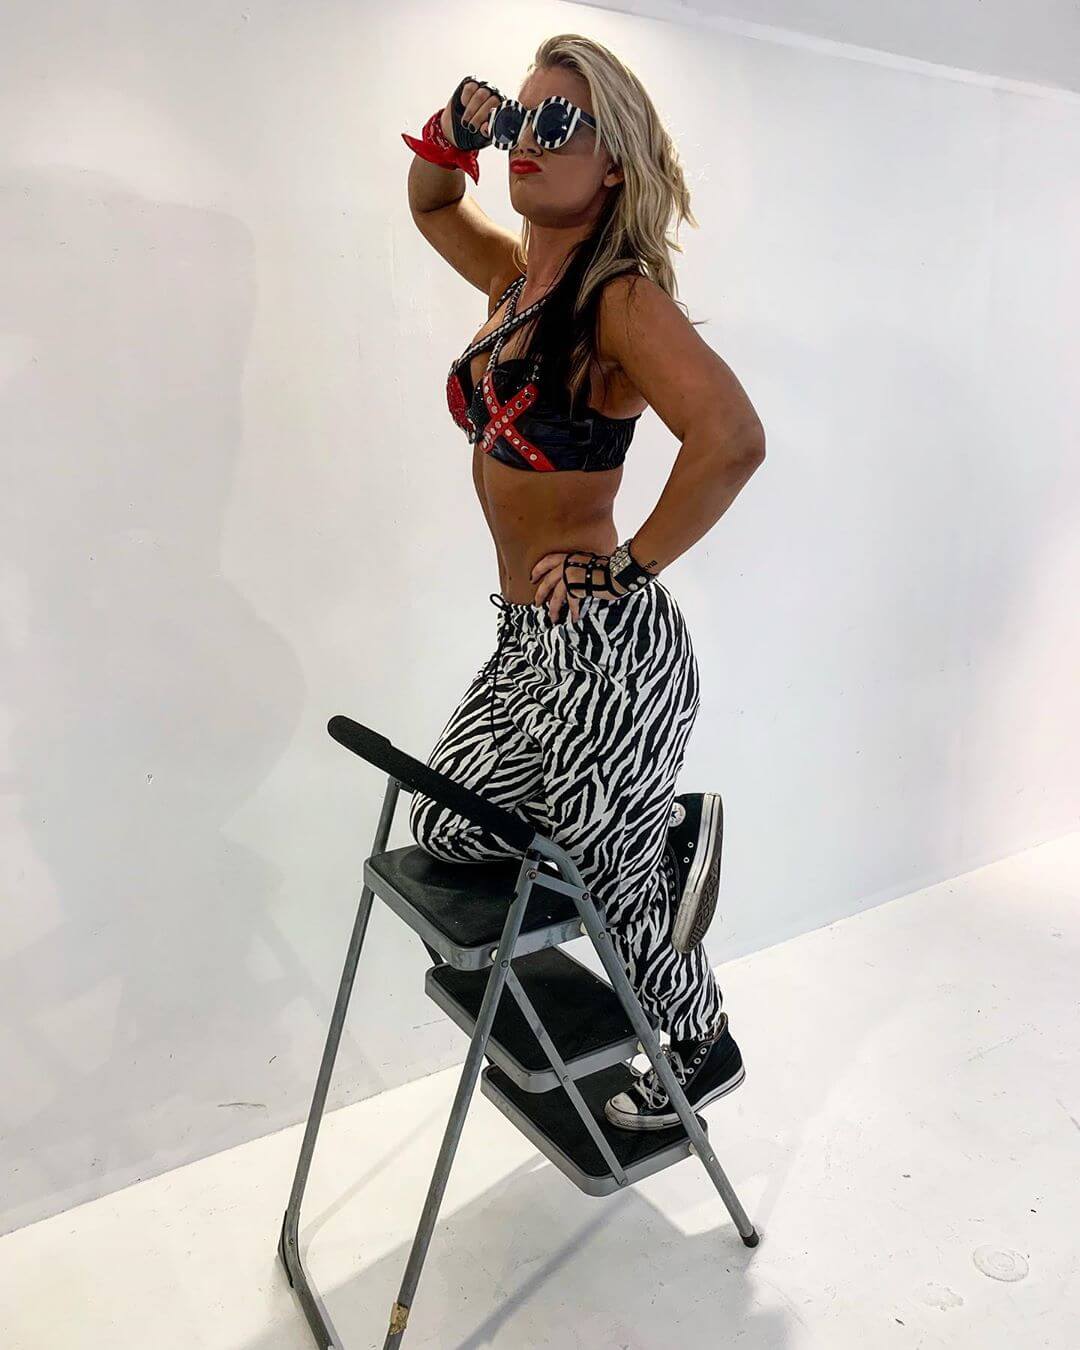 61 Hottest Toni Storm Big Butt Pictures Are Incredibly Sexy 421